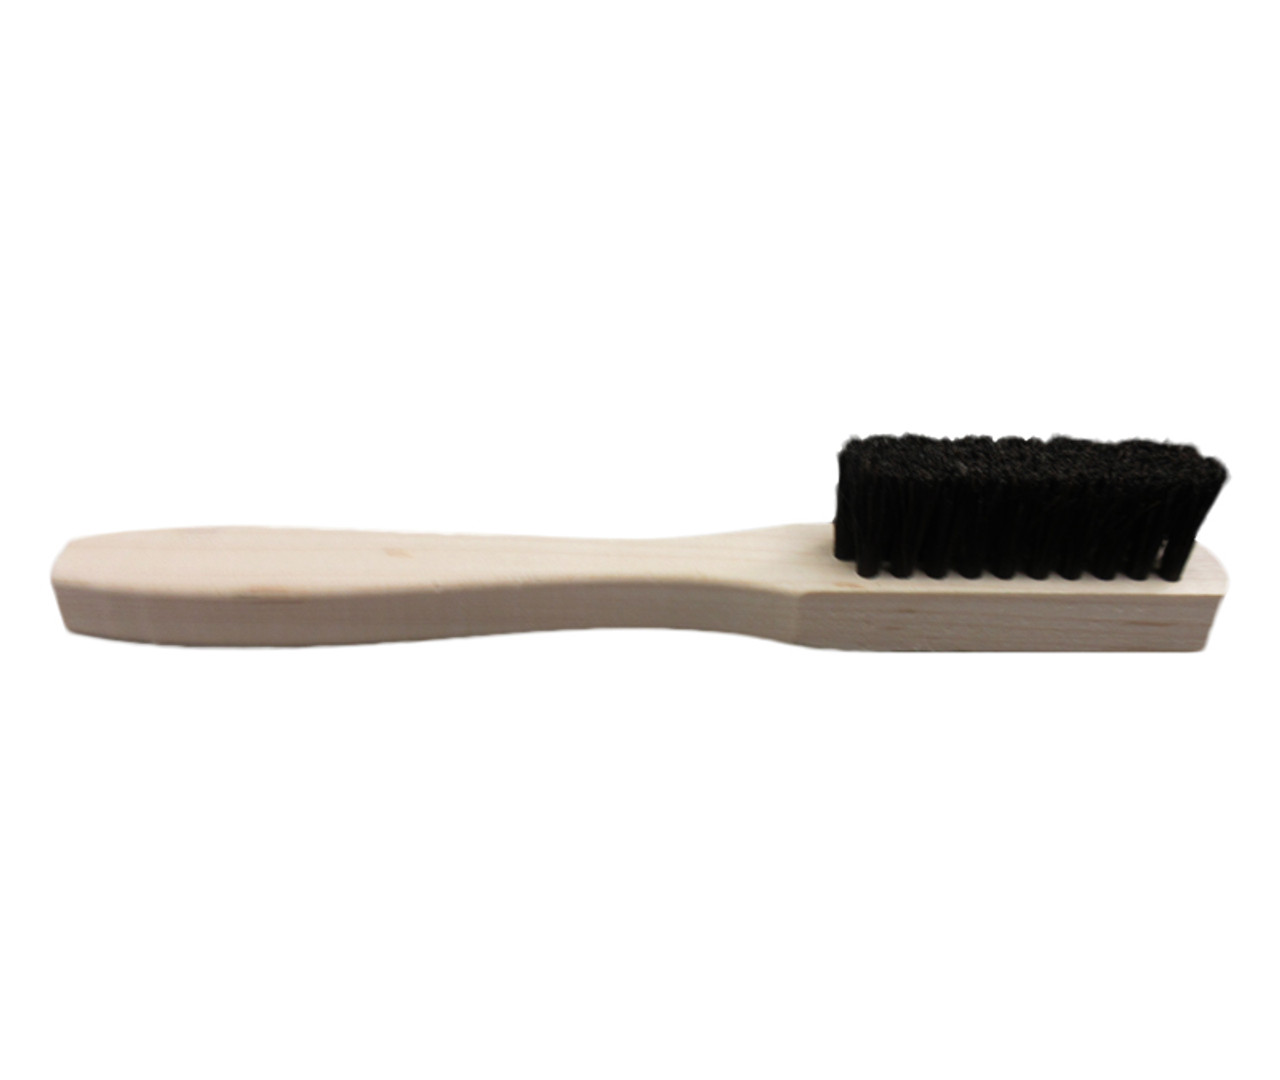 Perrone Aerospace BR-01 Small Wooden 6 handle with 1.5 Bristle Bed Leather  Cleaning Brush at